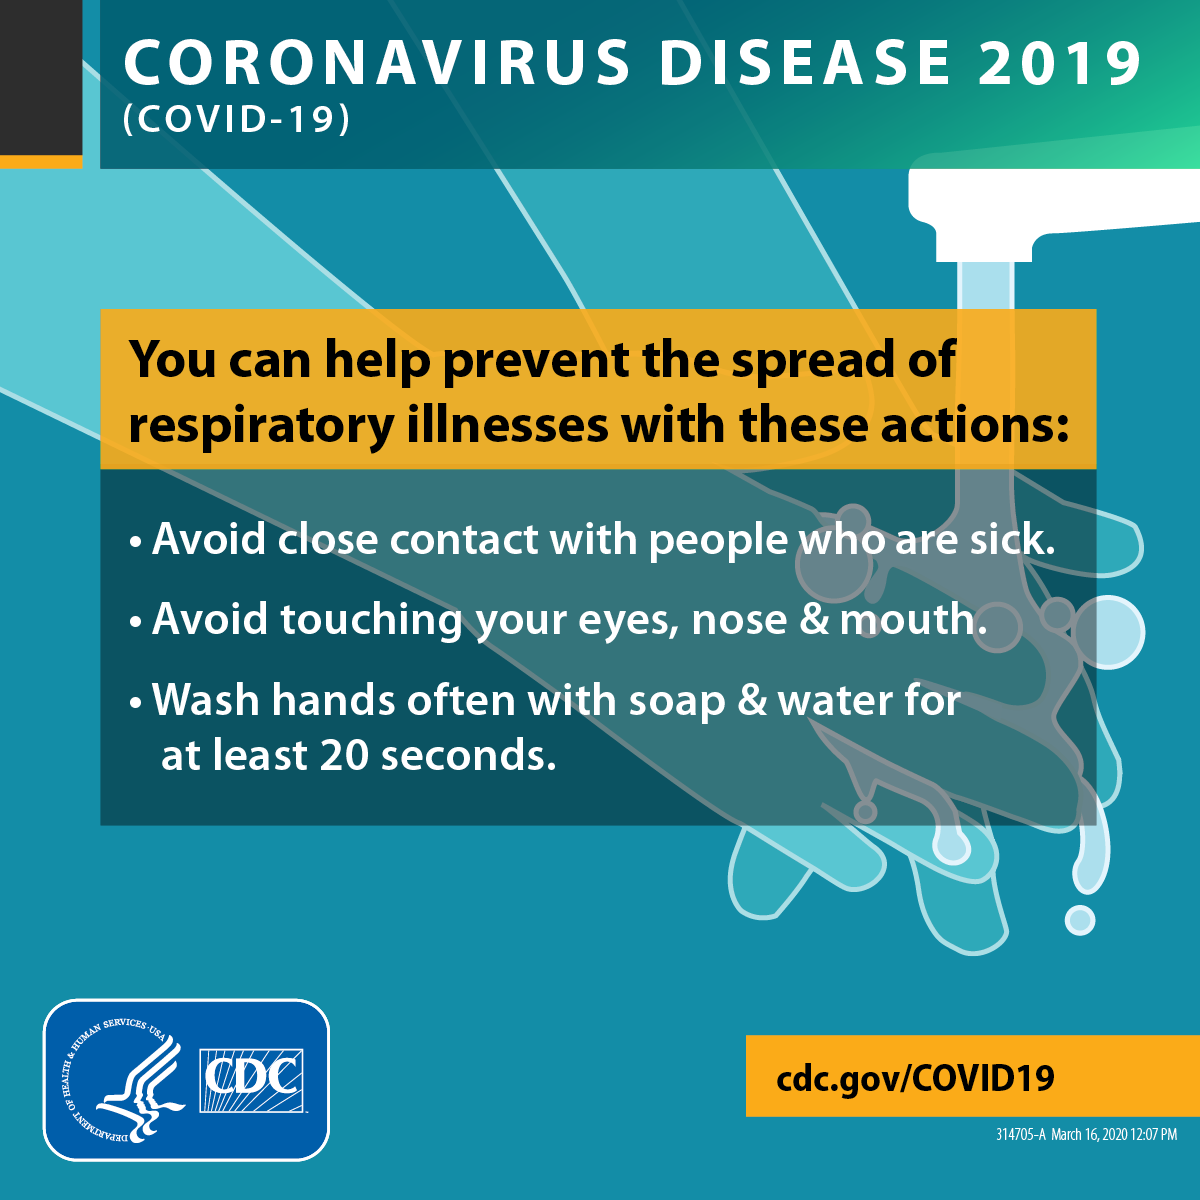 post thumbnail for HarborCOV changes to help prevent the spread of COVID-19 (coronavirus)